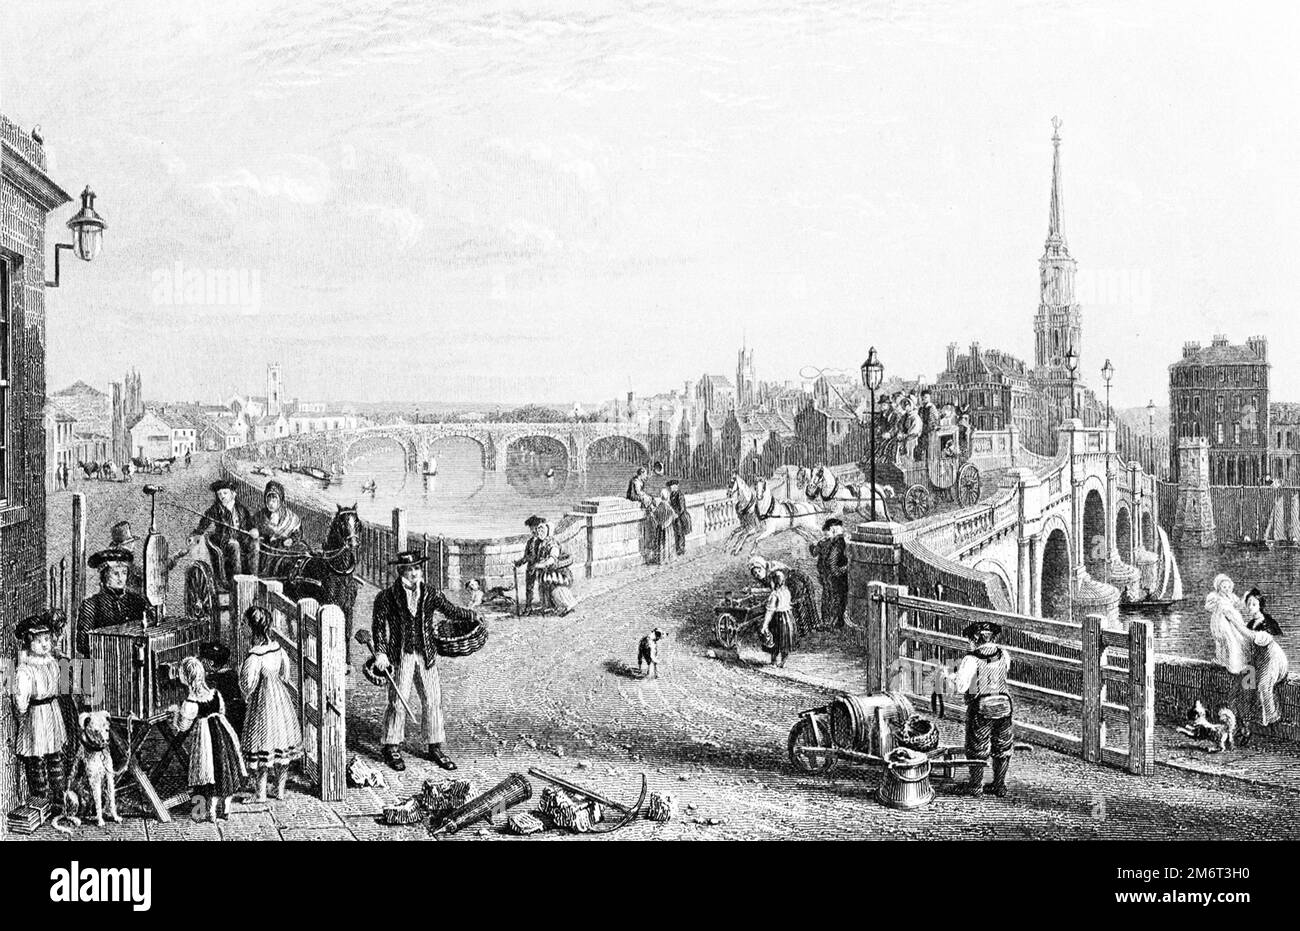 Illustration of a peepshow street showman (bottom left) in Ayr, Scotland in the 1840s Stock Photo